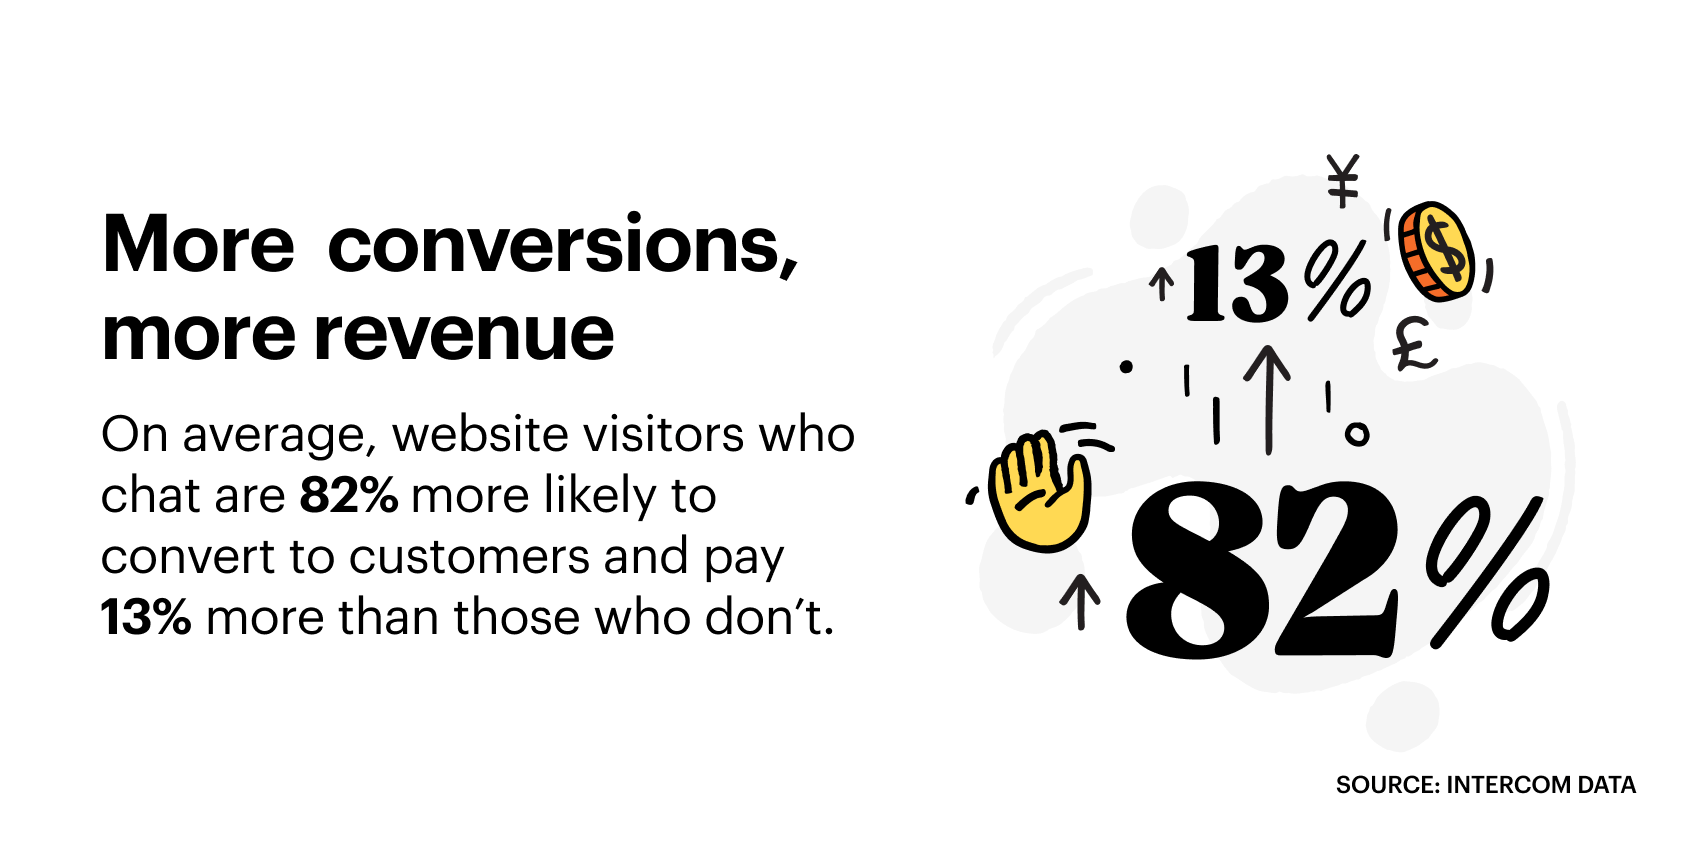 On average, website visitors who chat are 82% more likely to convert to customers and pay 13% more than those who don’t. Source: Intercom data